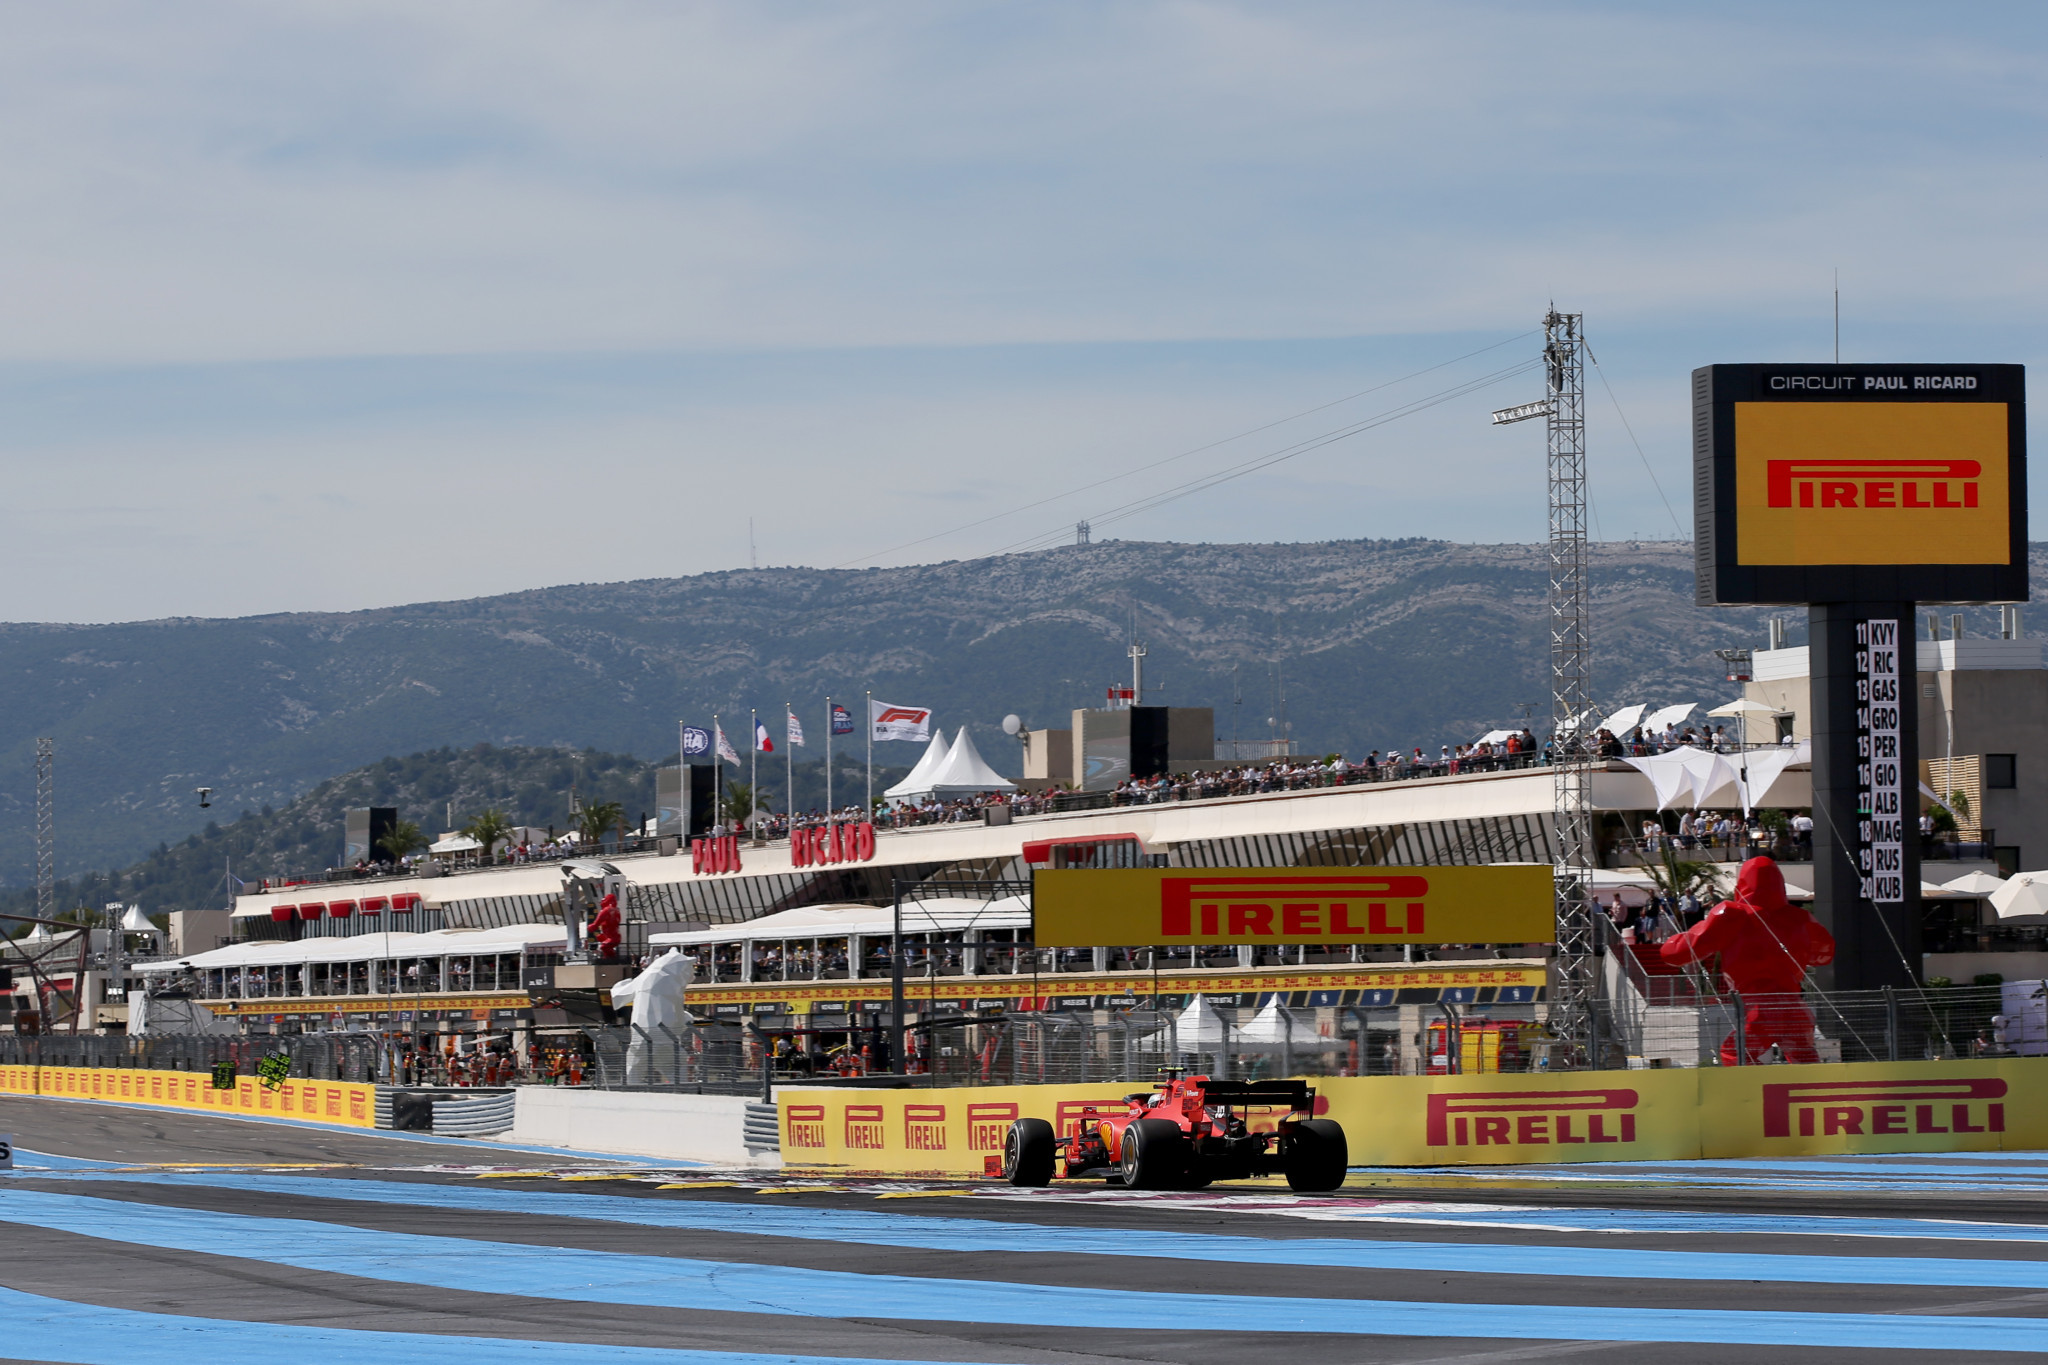 Marseille's Circuit Paul Ricard will host the Games next year ©FIA